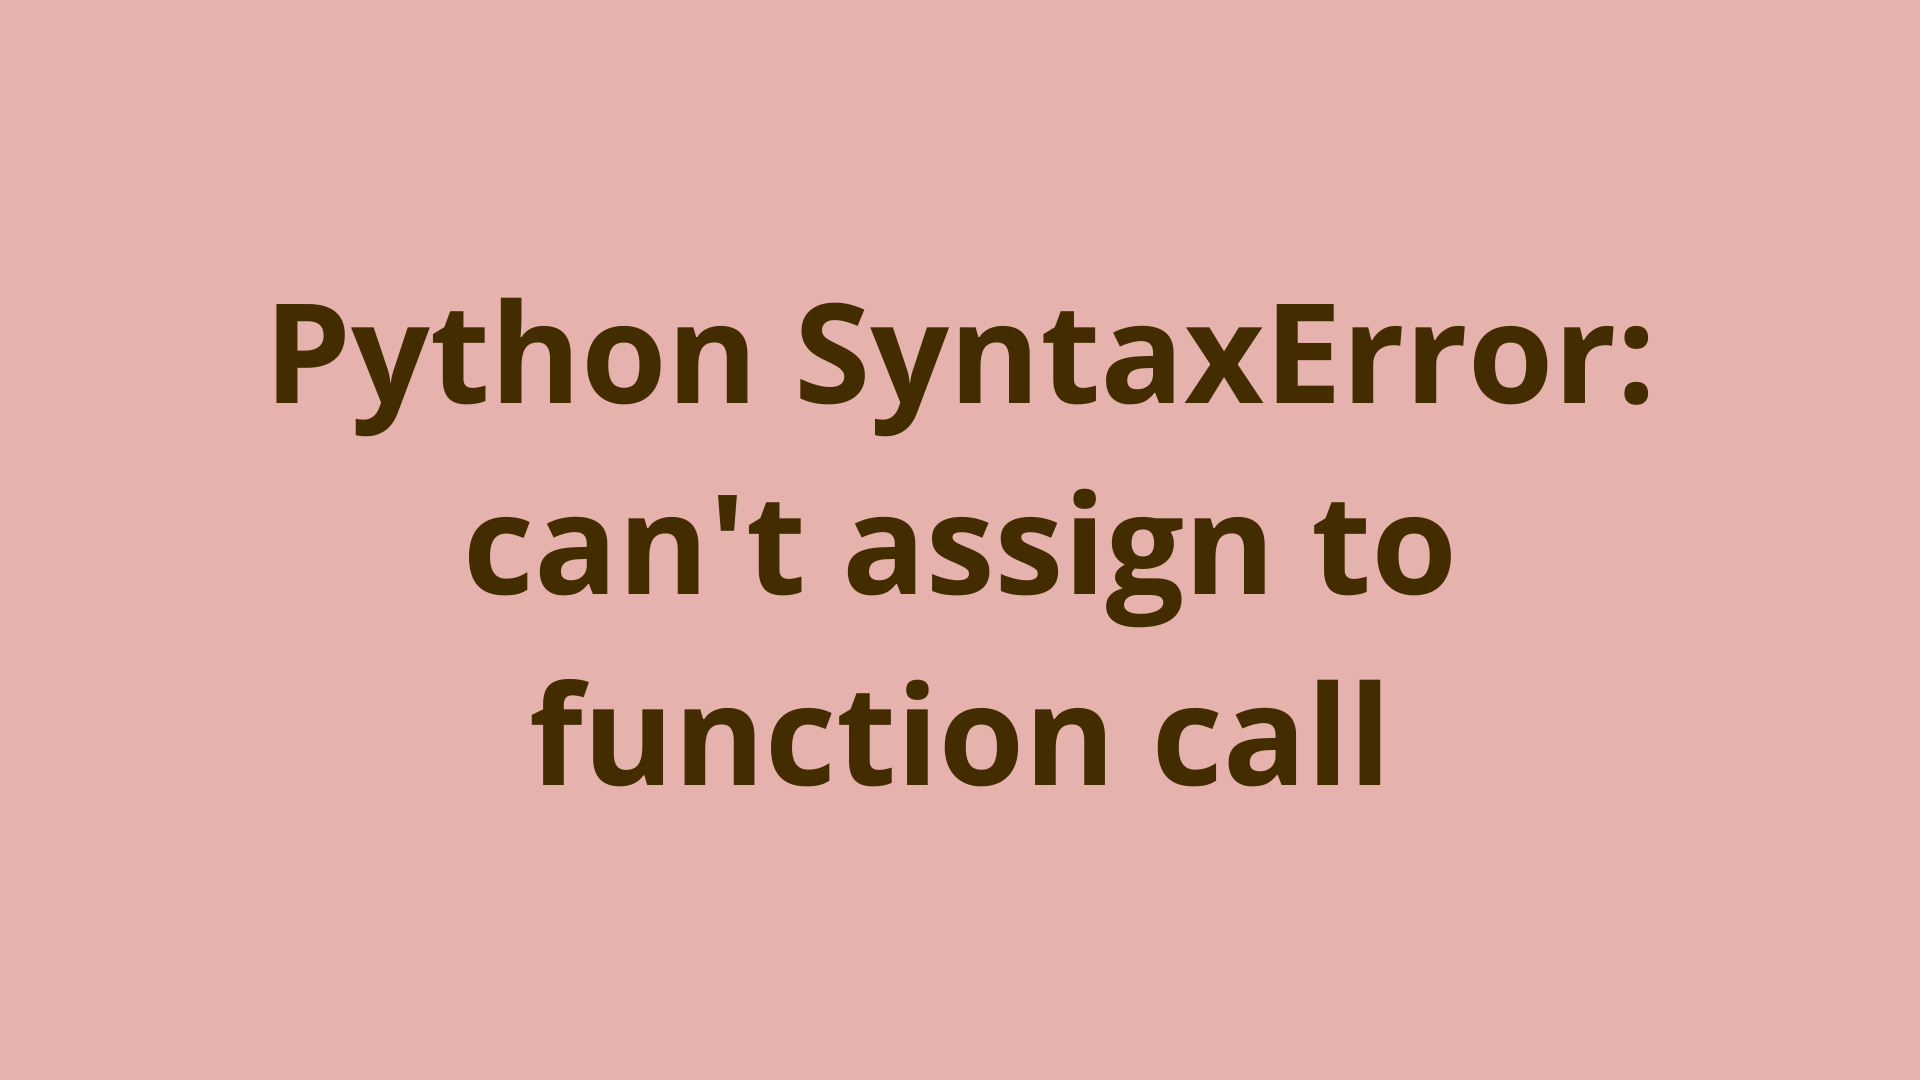 Image of Python SyntaxError: can't assign to function call